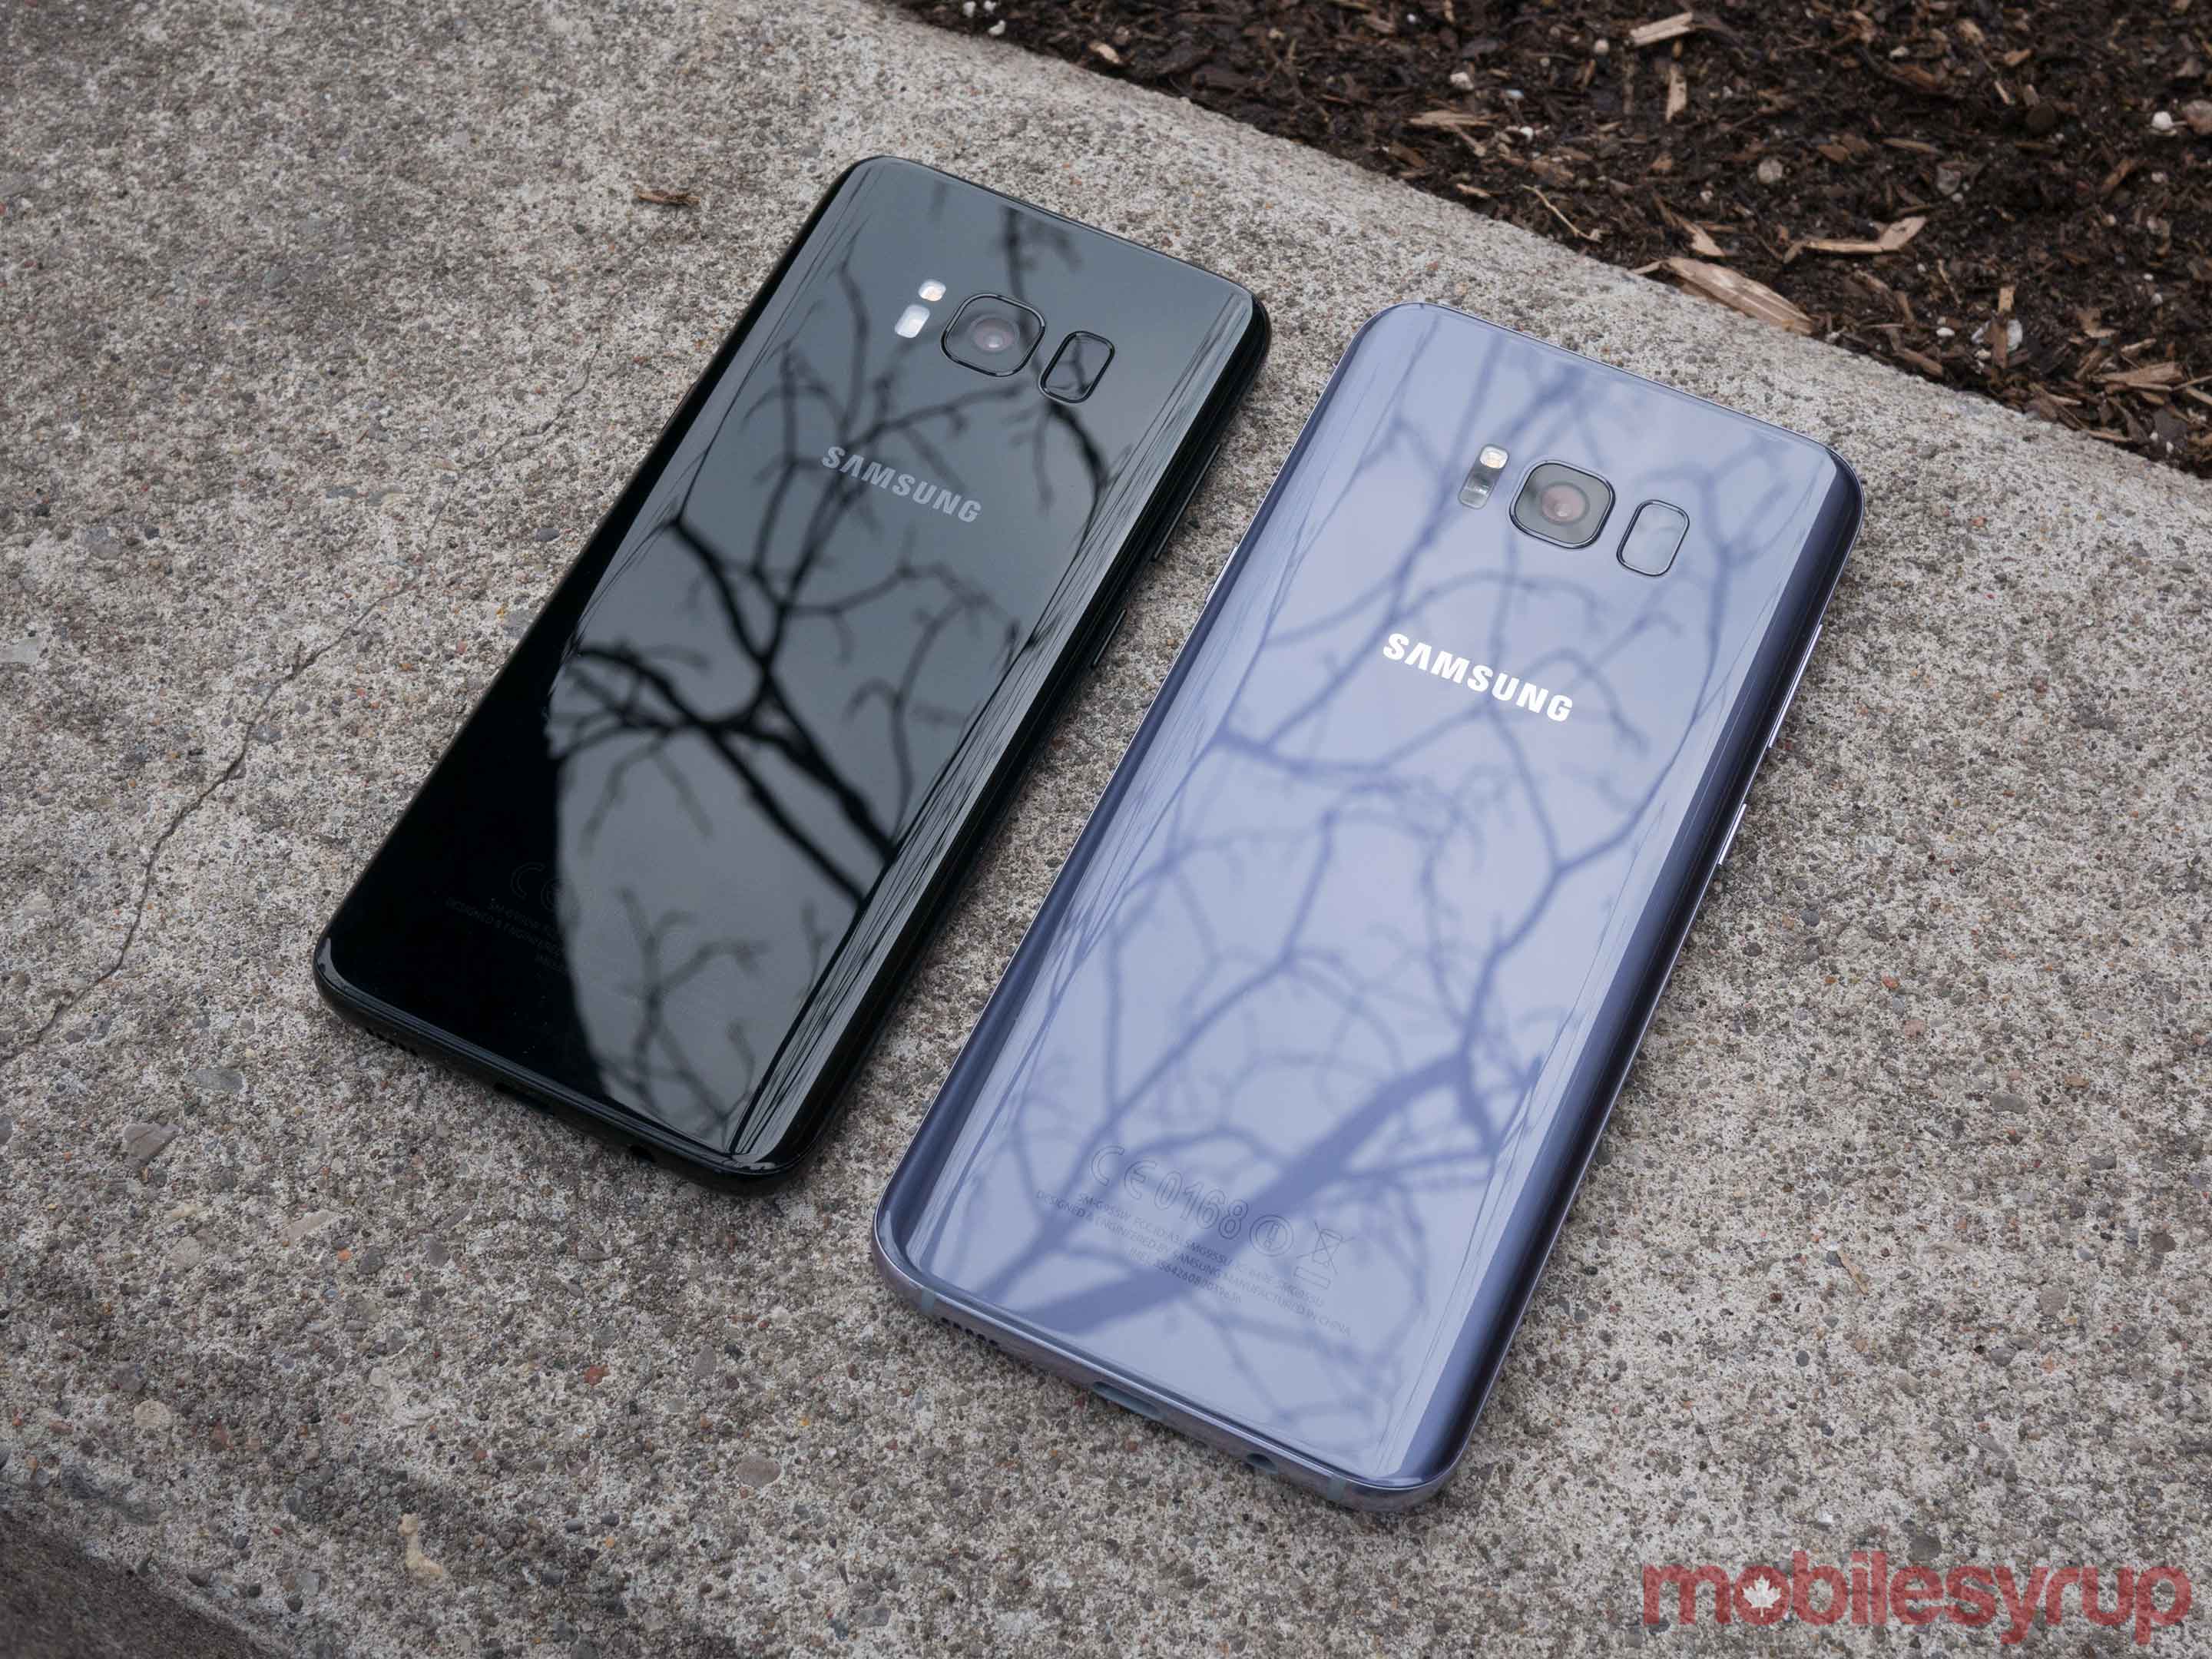 Galaxy S8 and S8+ on street curb